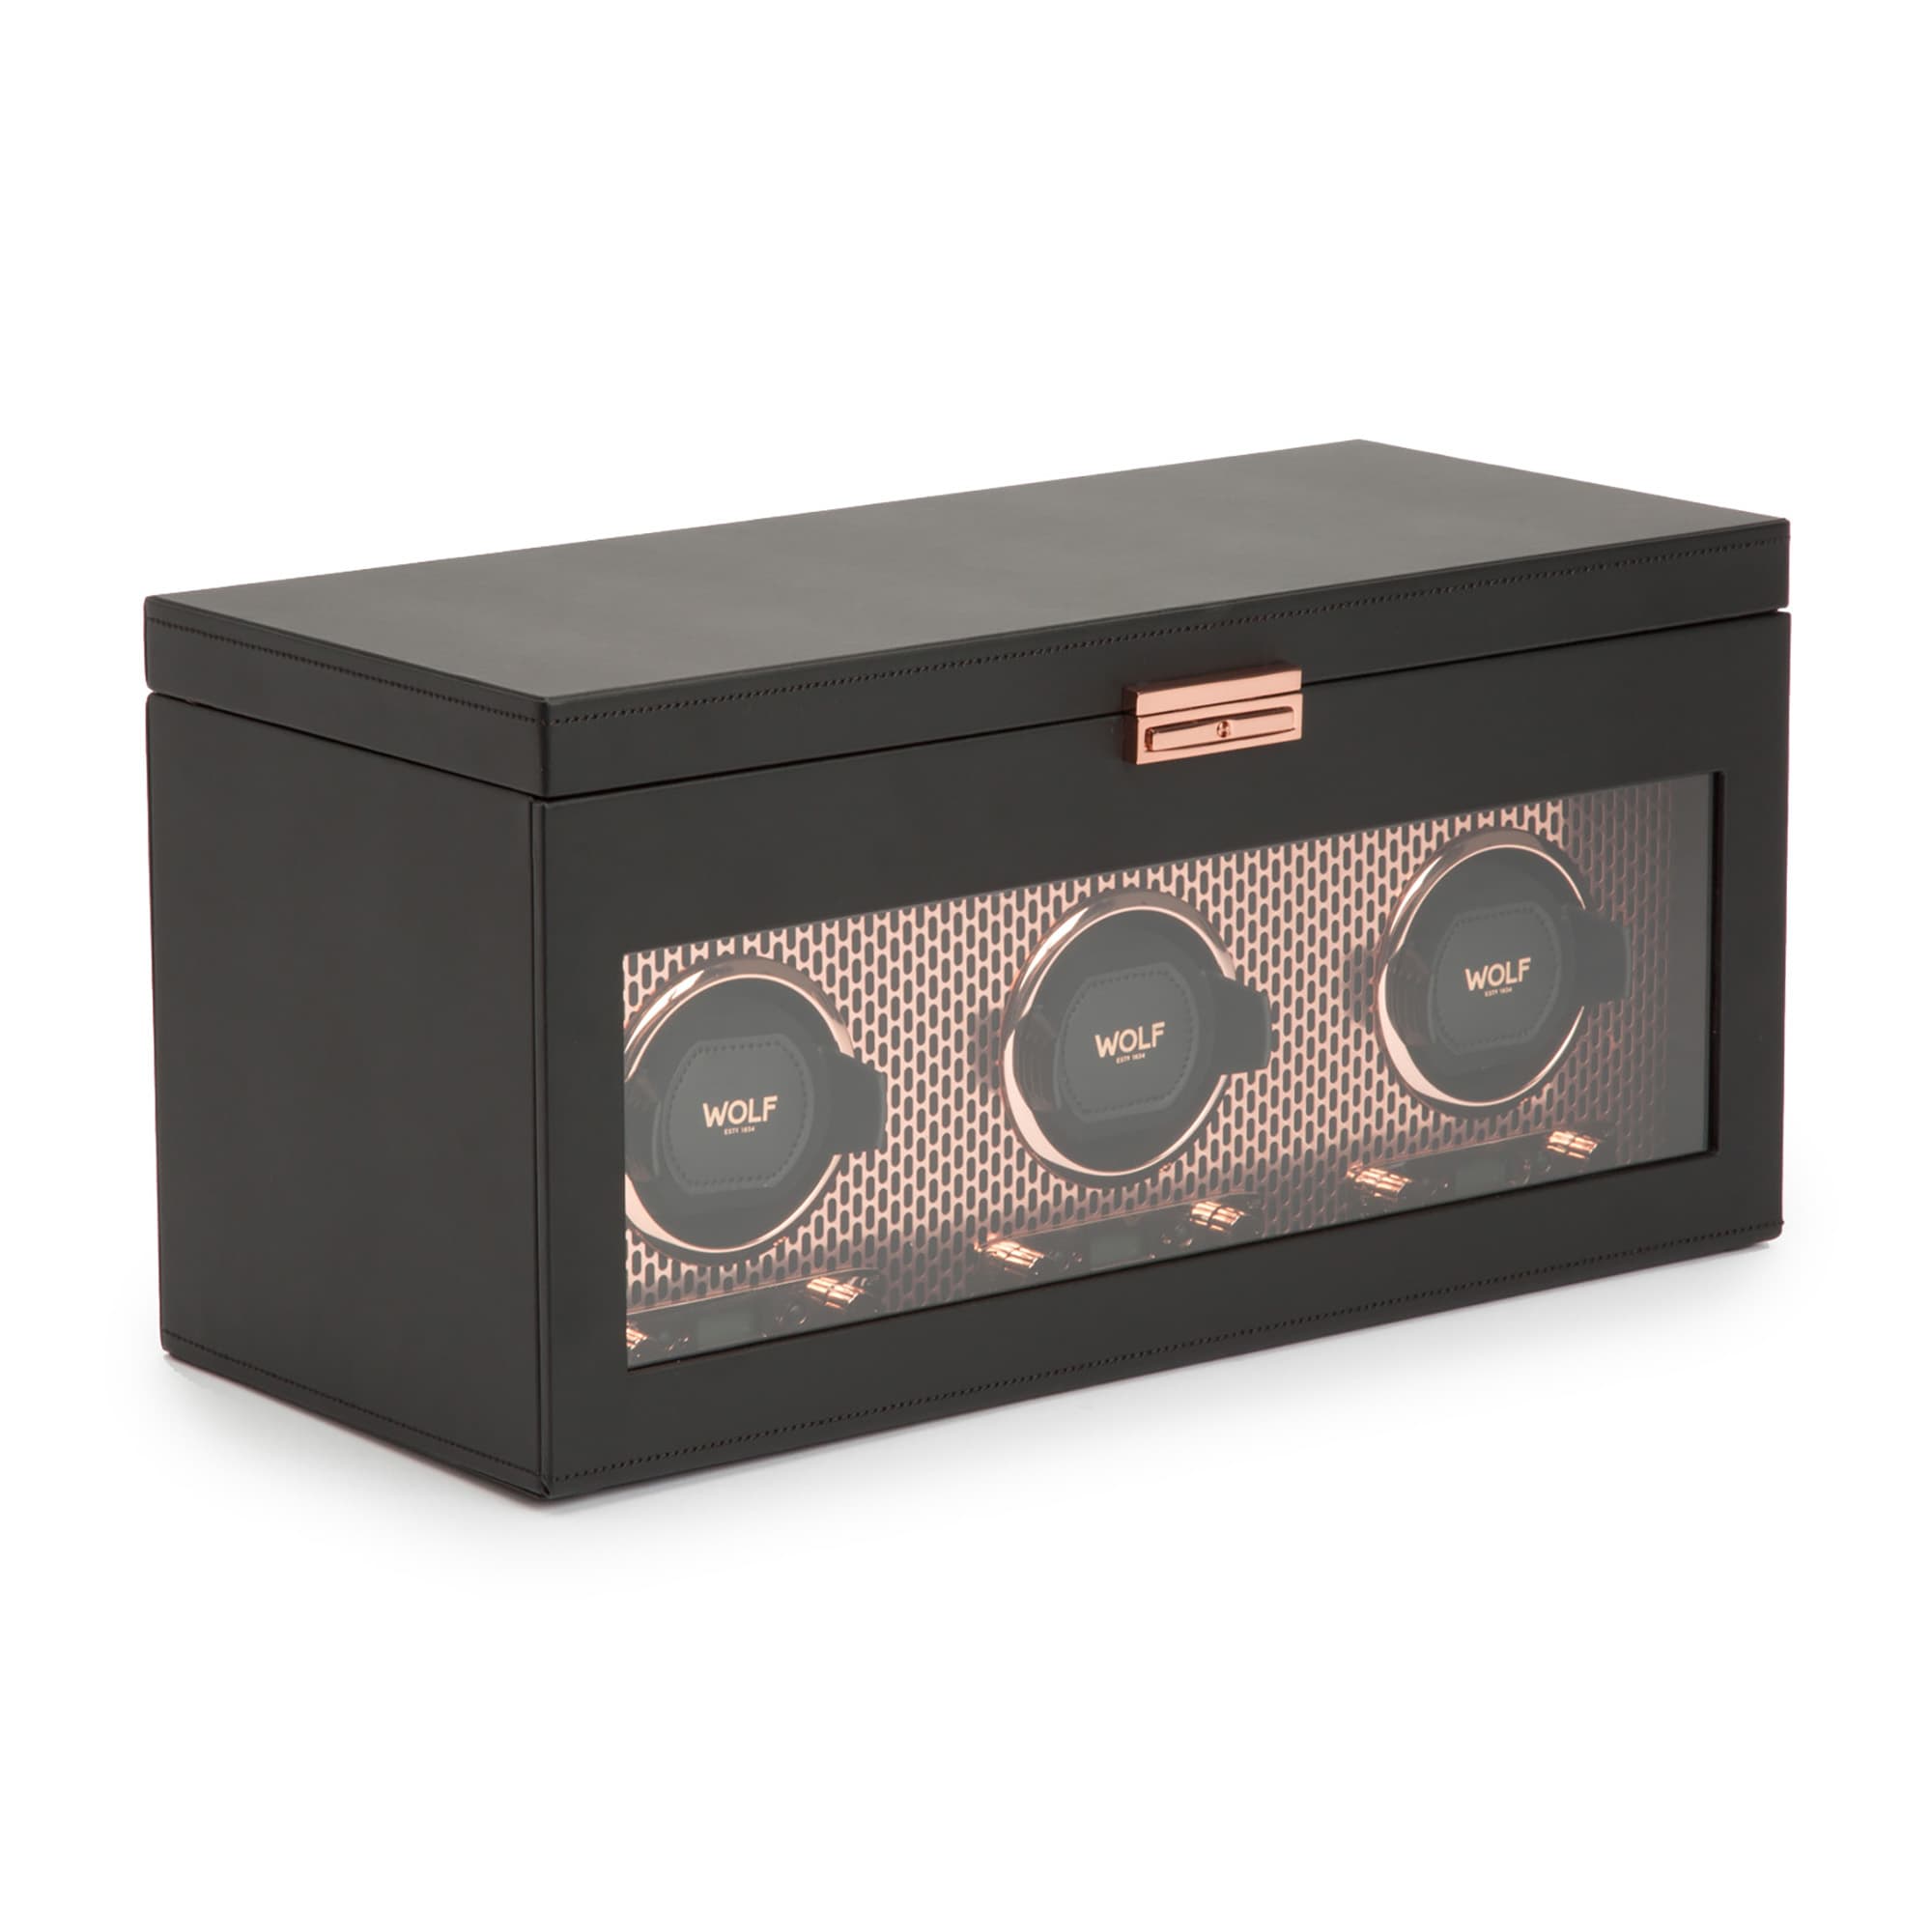 Wolf-Axis-Triple-Watch-Winder-with-Storage-Copper-469416-1